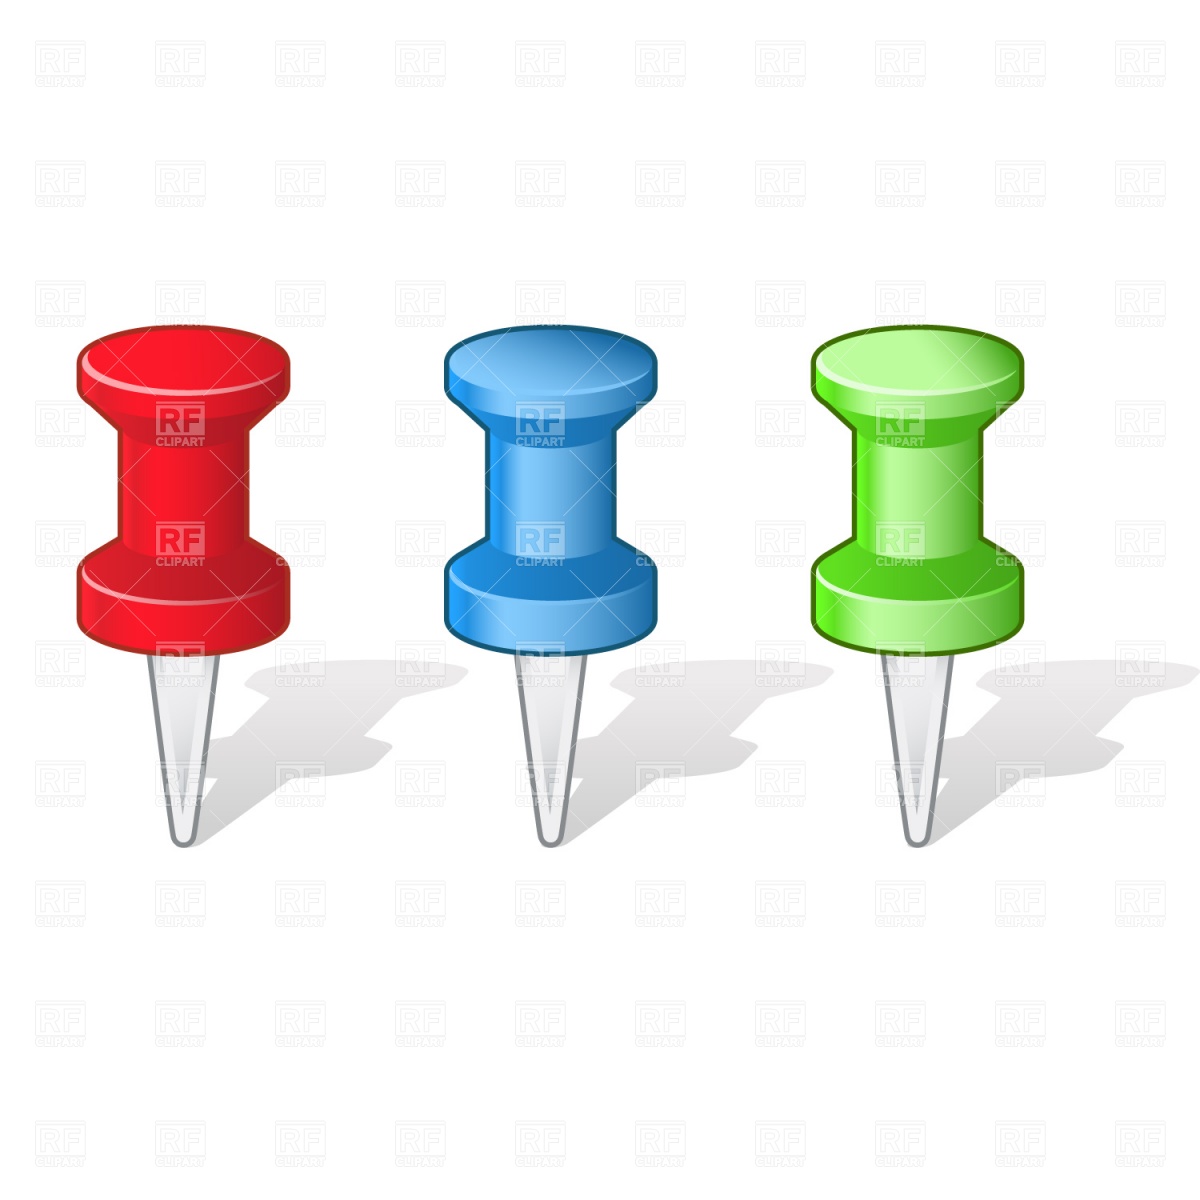 Push Pins 1261 Design Elements Download Royalty Free Vector Clipart